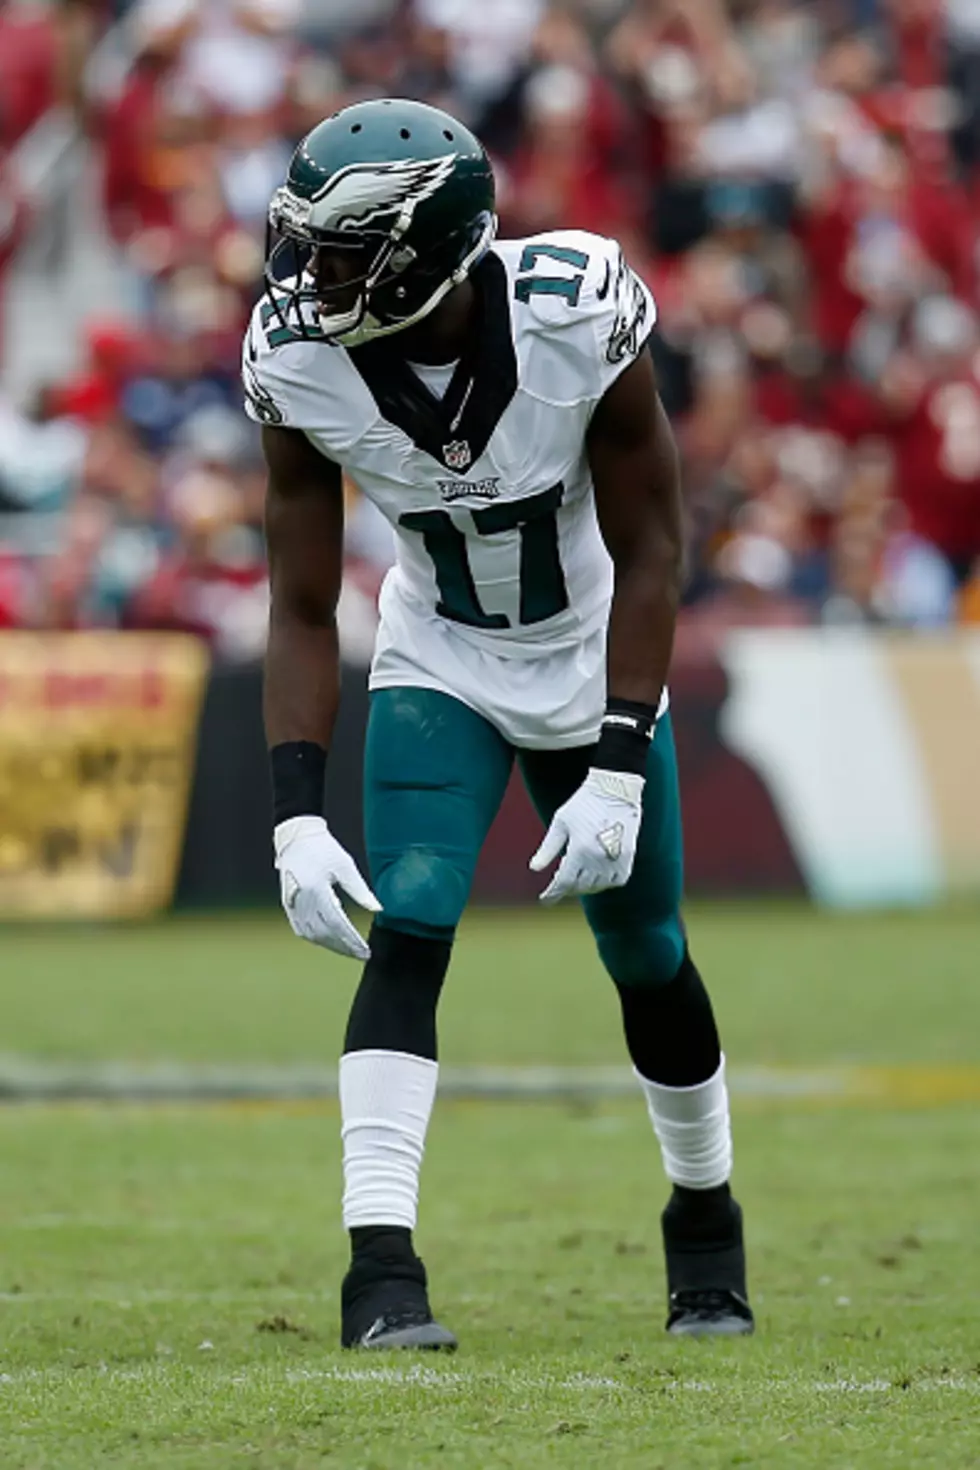 Davenport: Agholor Is Eventually Going To Be A Good Player